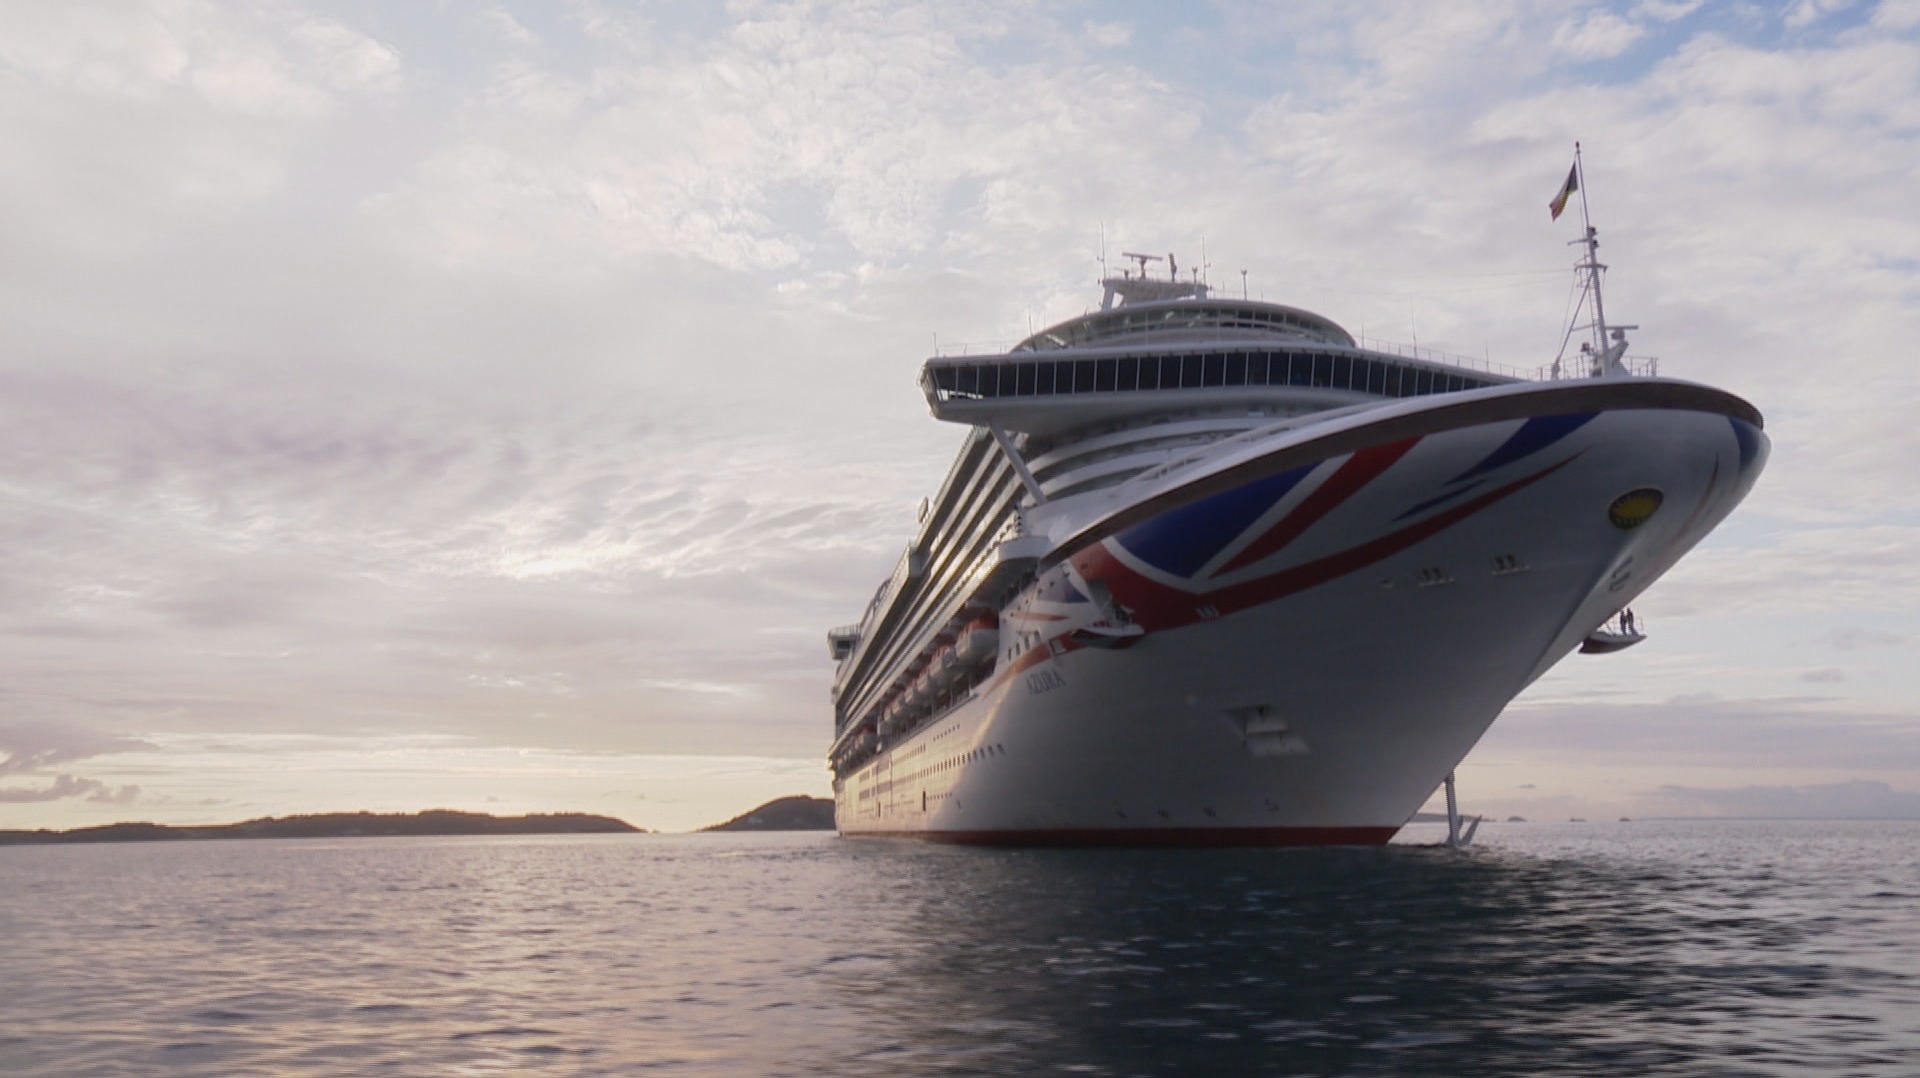 cruises to jersey and guernsey